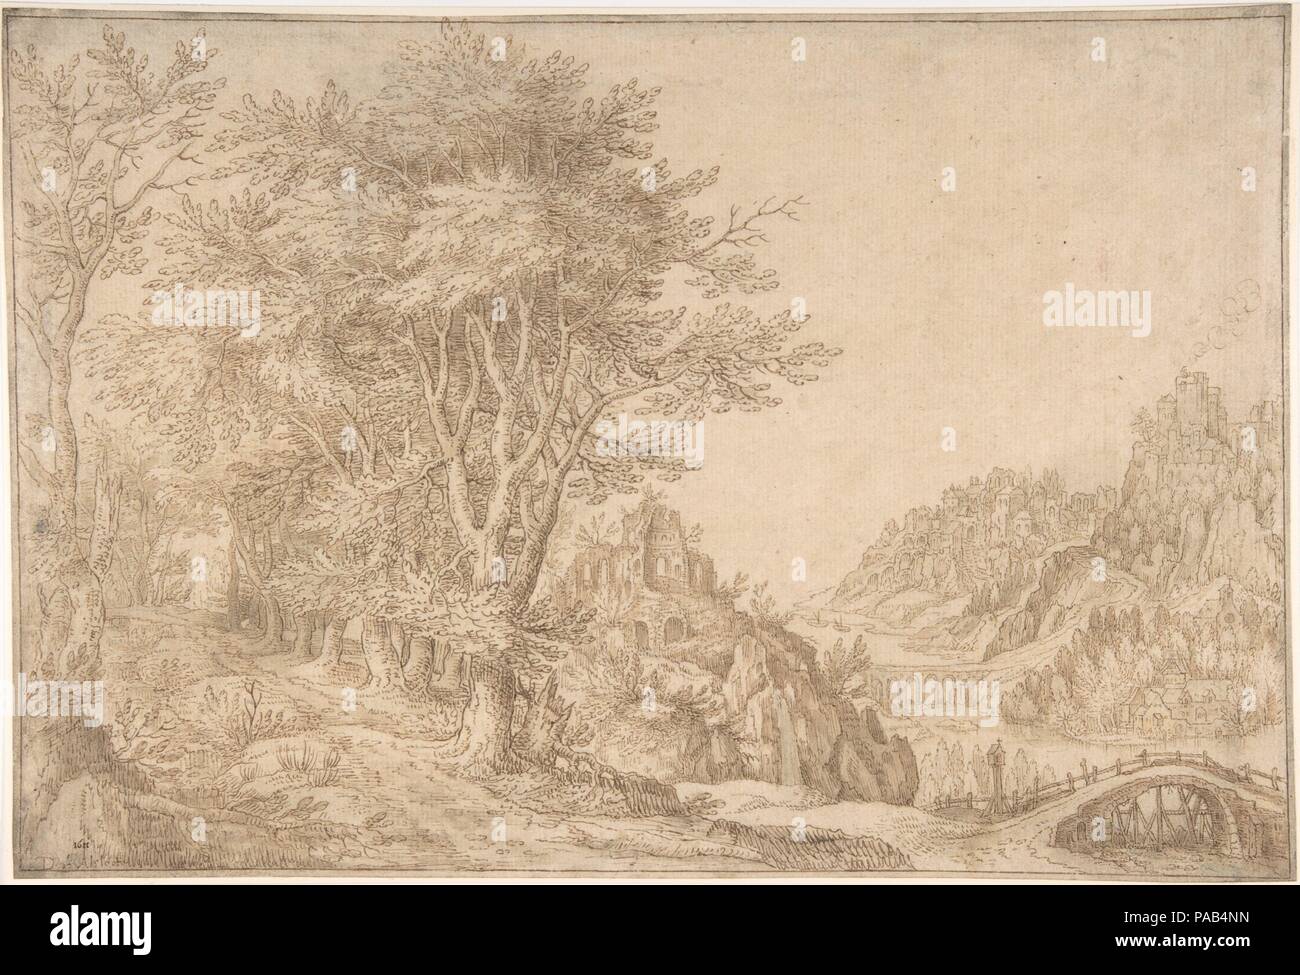 Wooded Landscape with a River, Castle, and Town Beyond. Artist: Denis van Alsloot (Brussels, before 1573-1625/26 Brussels). Dimensions: 9 7/16 x 13 15/16 in.  (24 x 35.4 cm). Date: 1611 (?). Museum: Metropolitan Museum of Art, New York, USA. Stock Photo